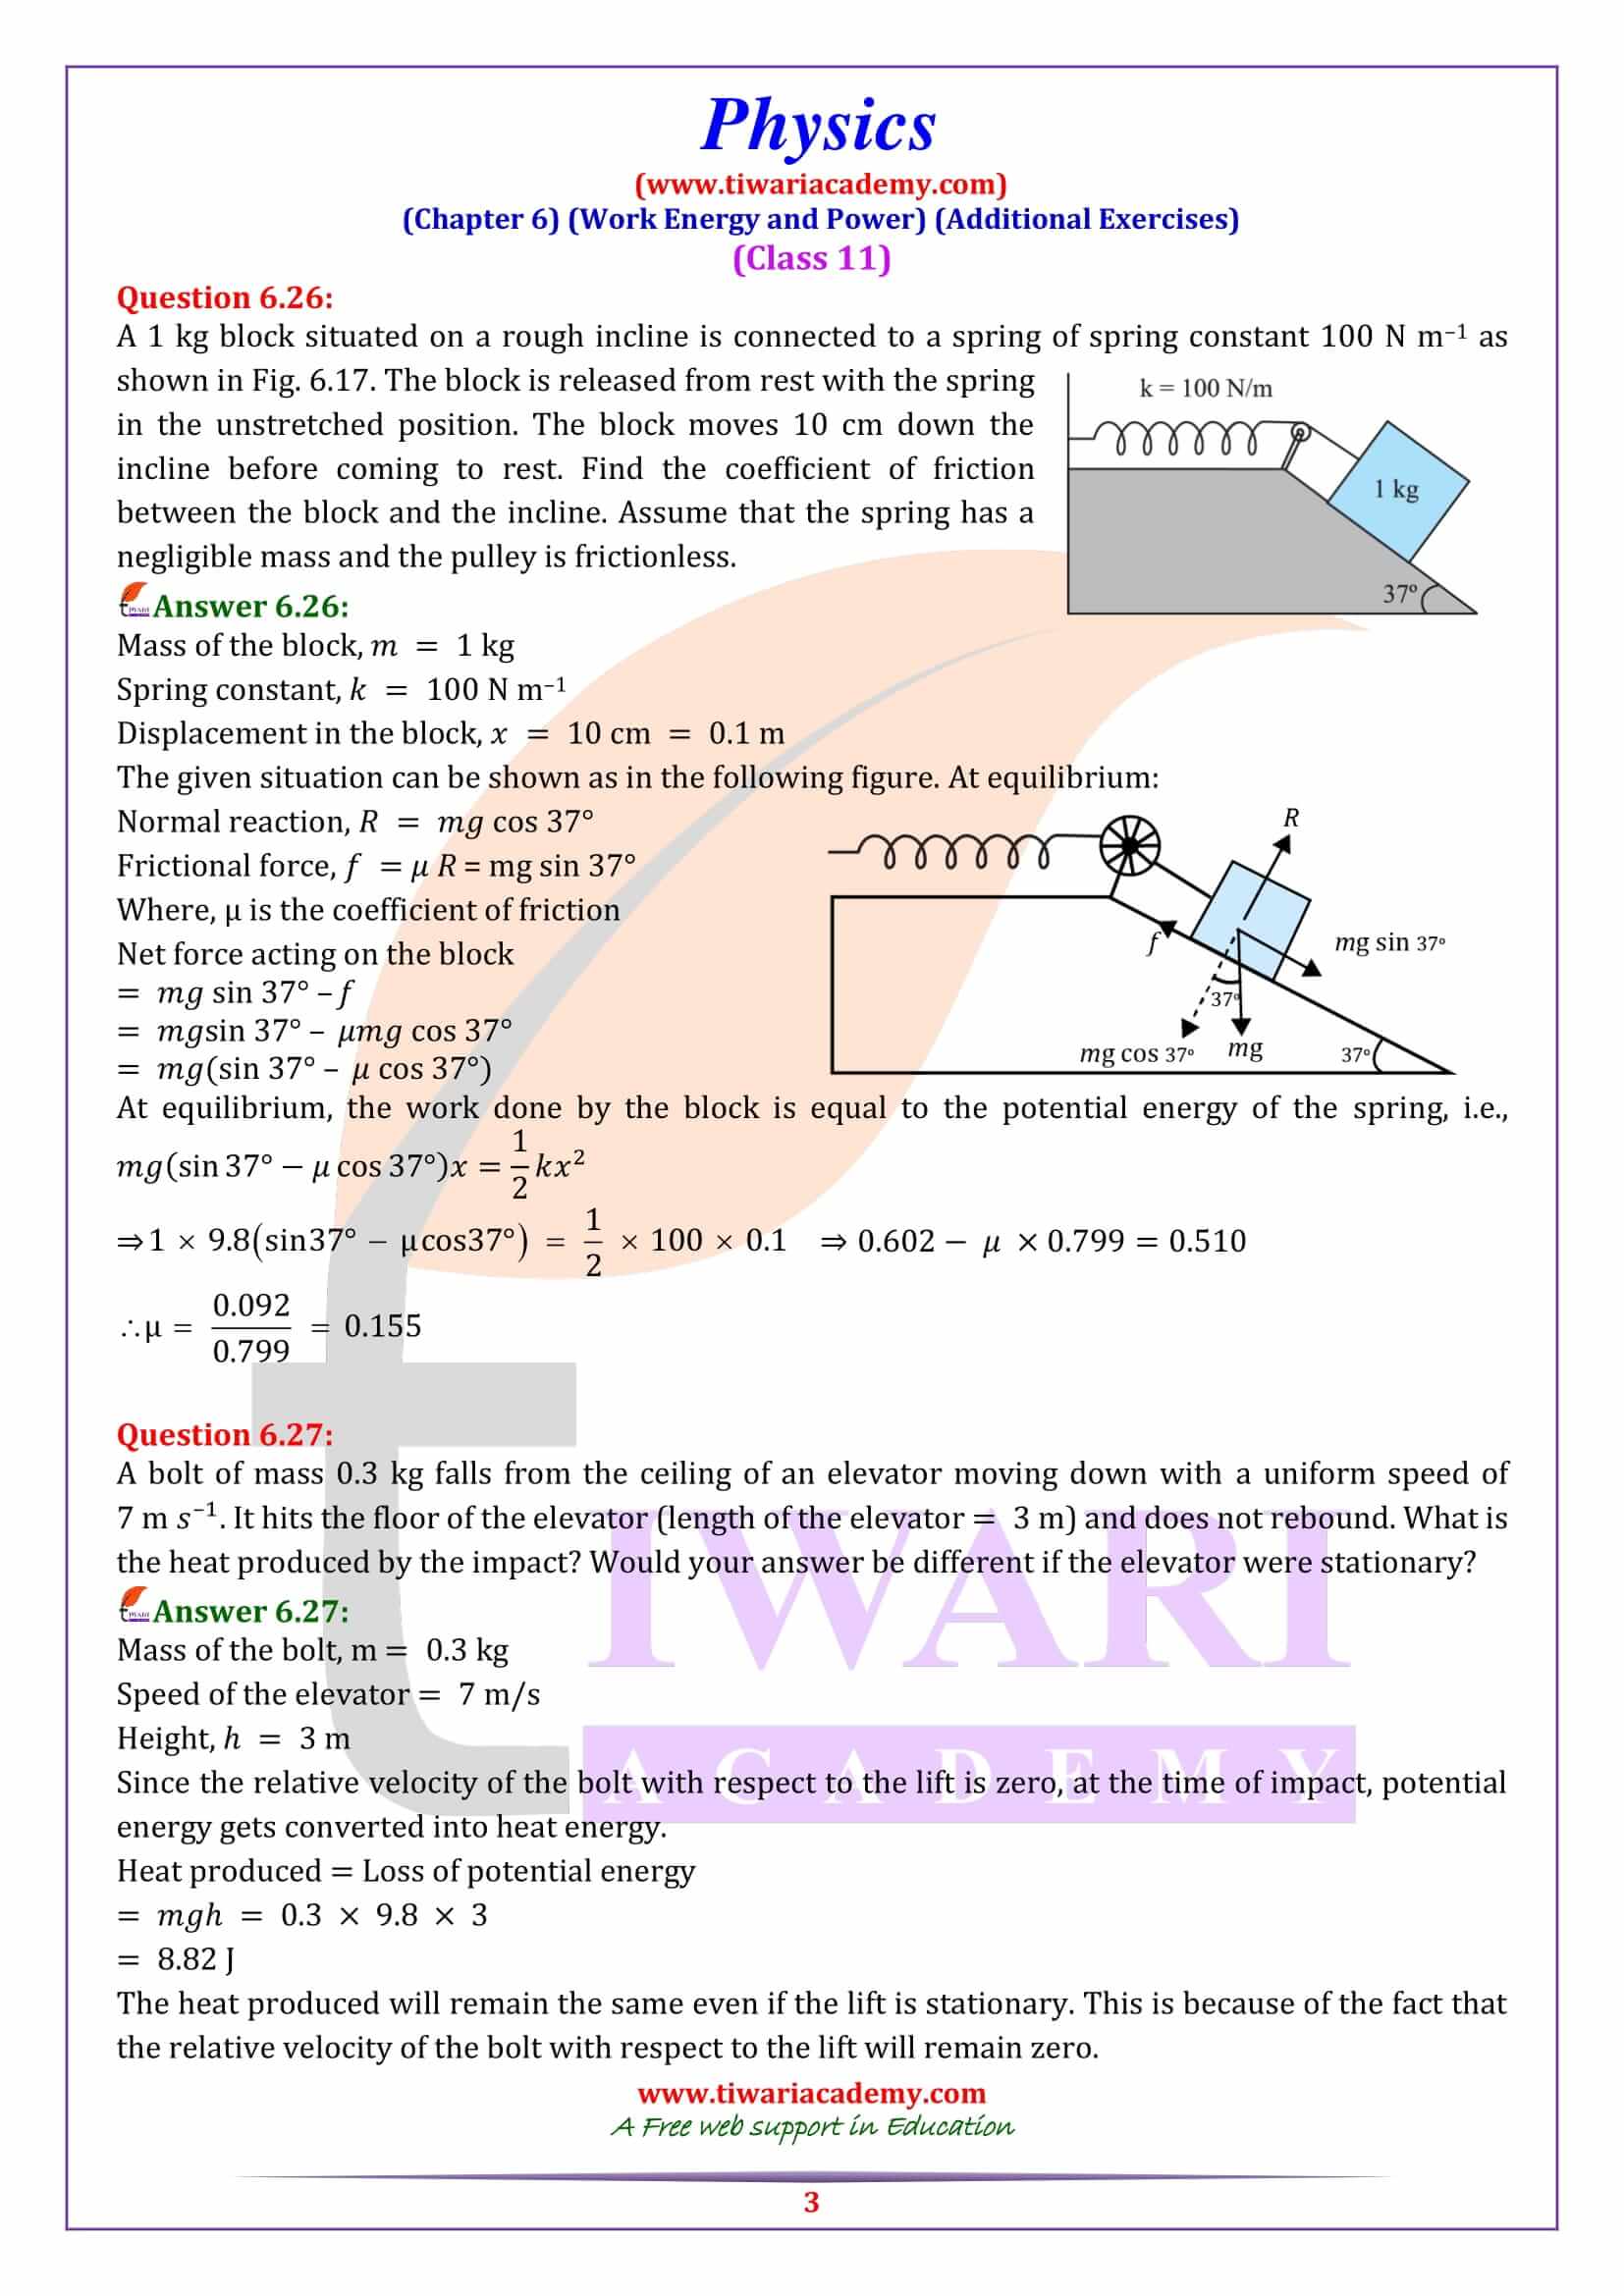 NCERT Solutions for Class 11 Physics Chapter 6 in PDF